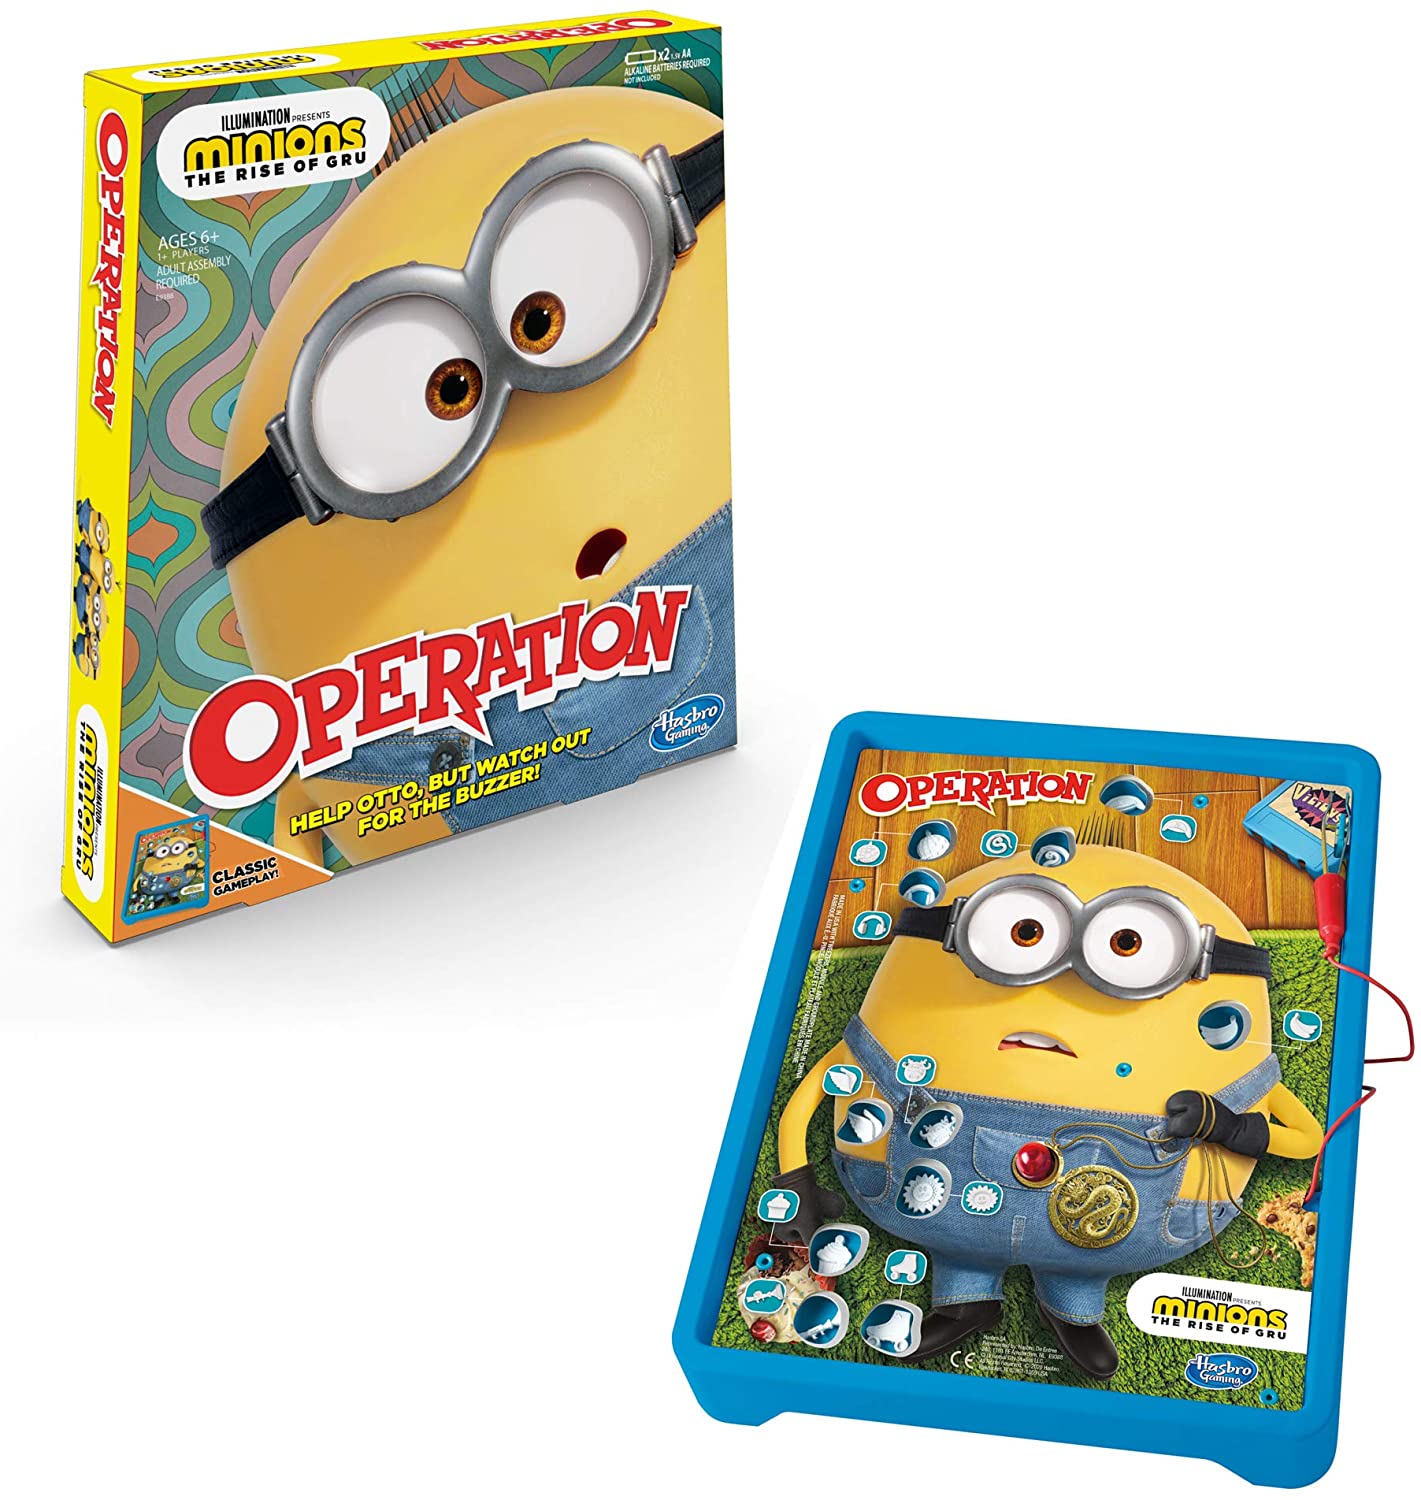 Hasbro Gaming Operation Game: Minions: The Rise of Gru Edition Board Game $9.10 + Free Shipping w/ Walmart+ or on $35+